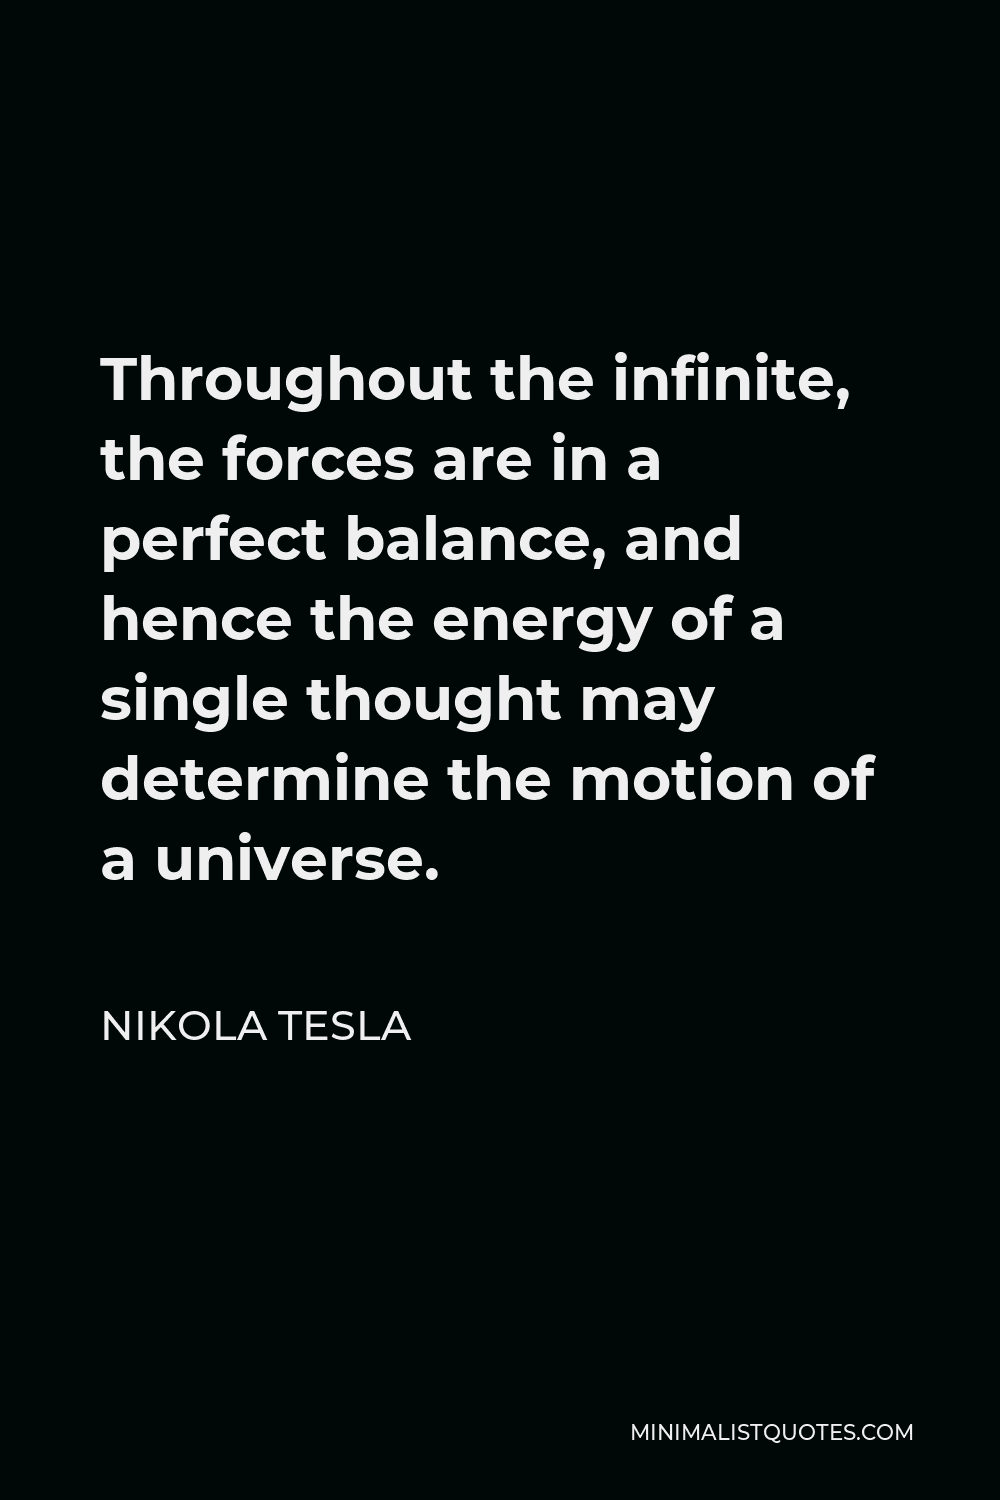 Nikola Tesla Quote: We are all one. Only egos, beliefs, and fears ...